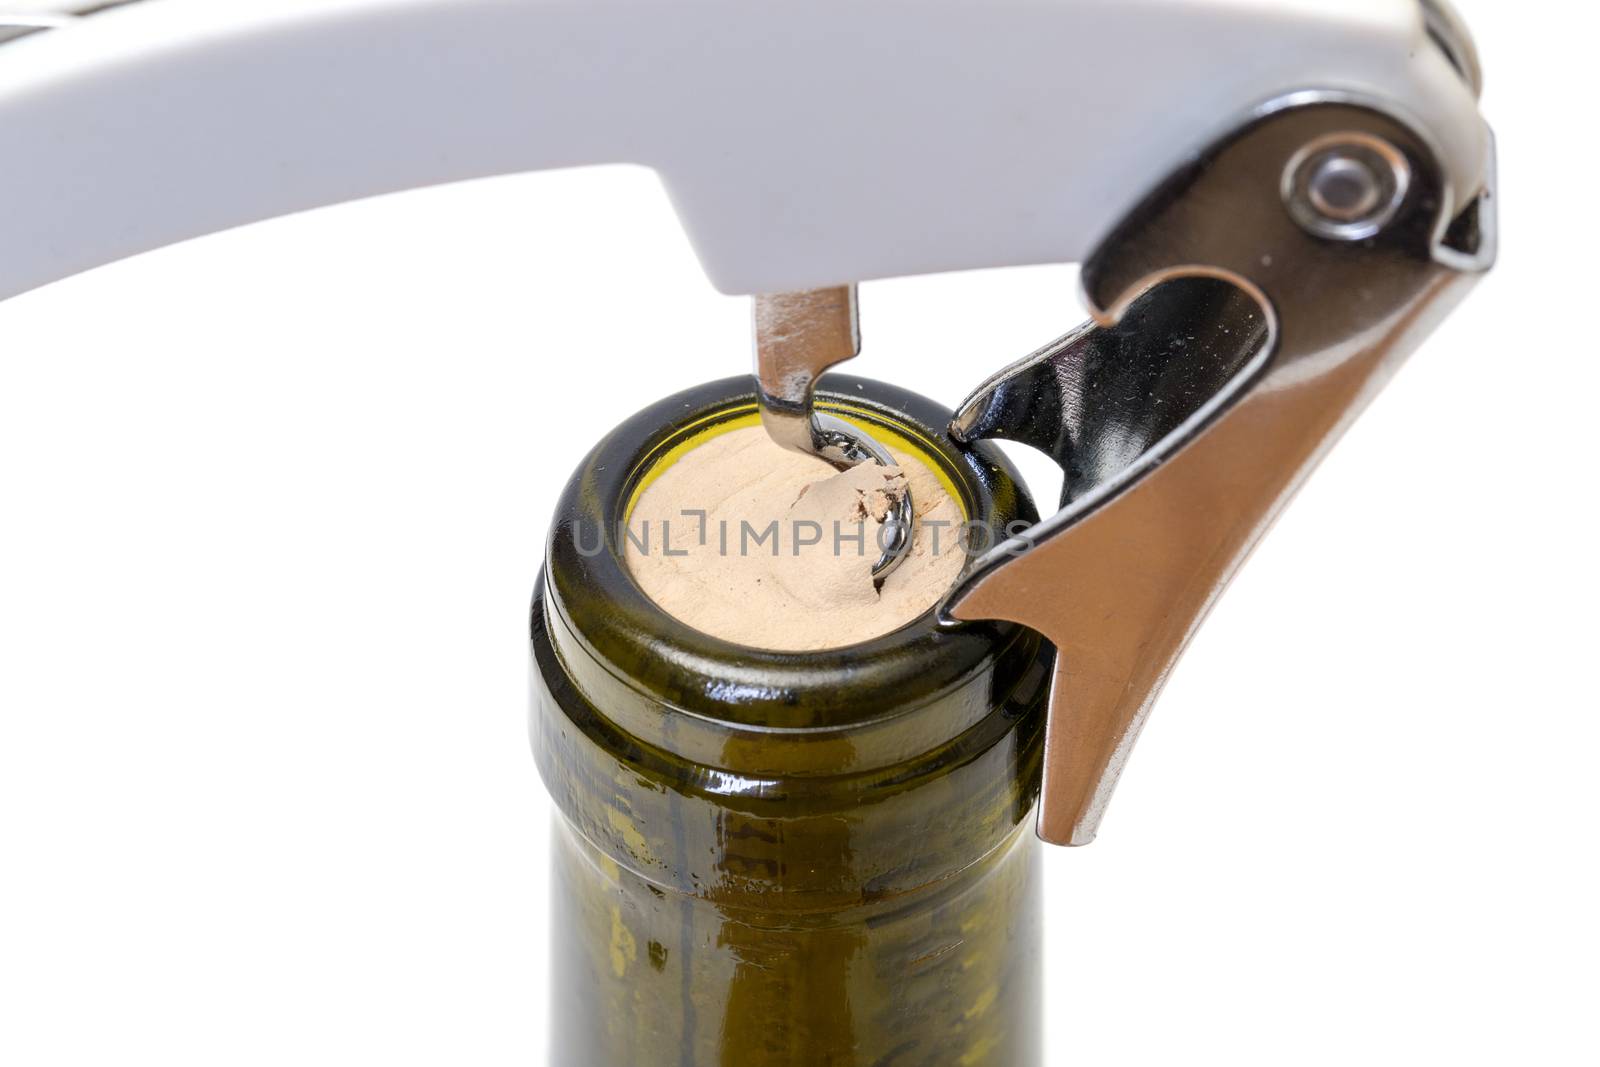 Corkscrew with Bottle of Wine, on white background